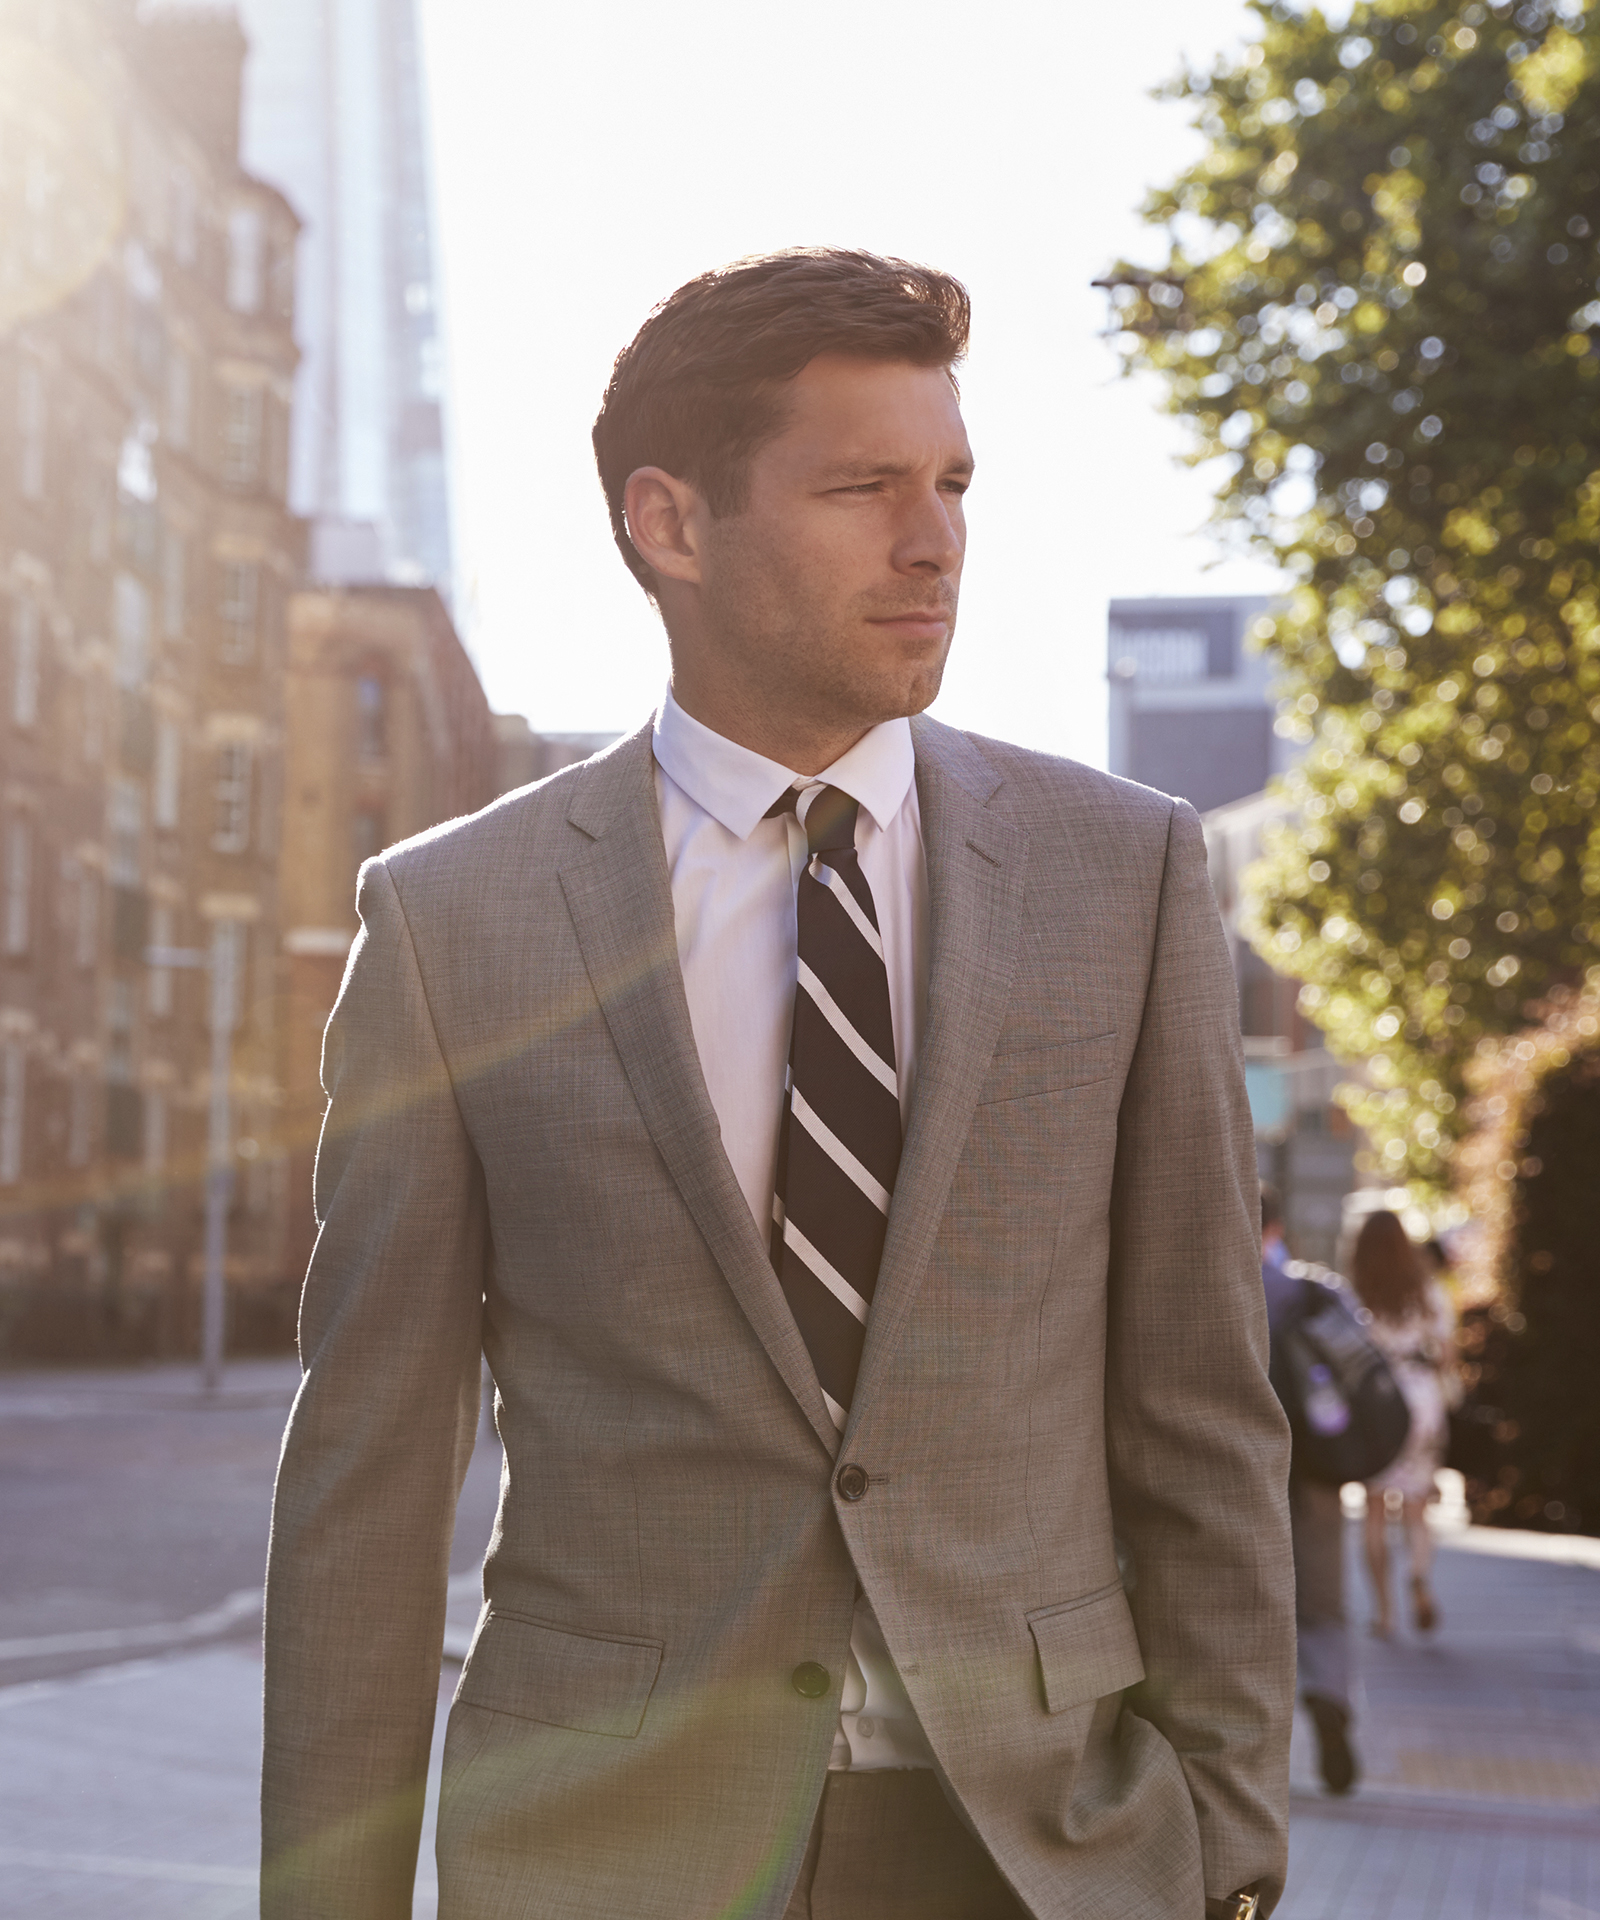 Wearing a grey suit with a striped charcoal/white tie in London